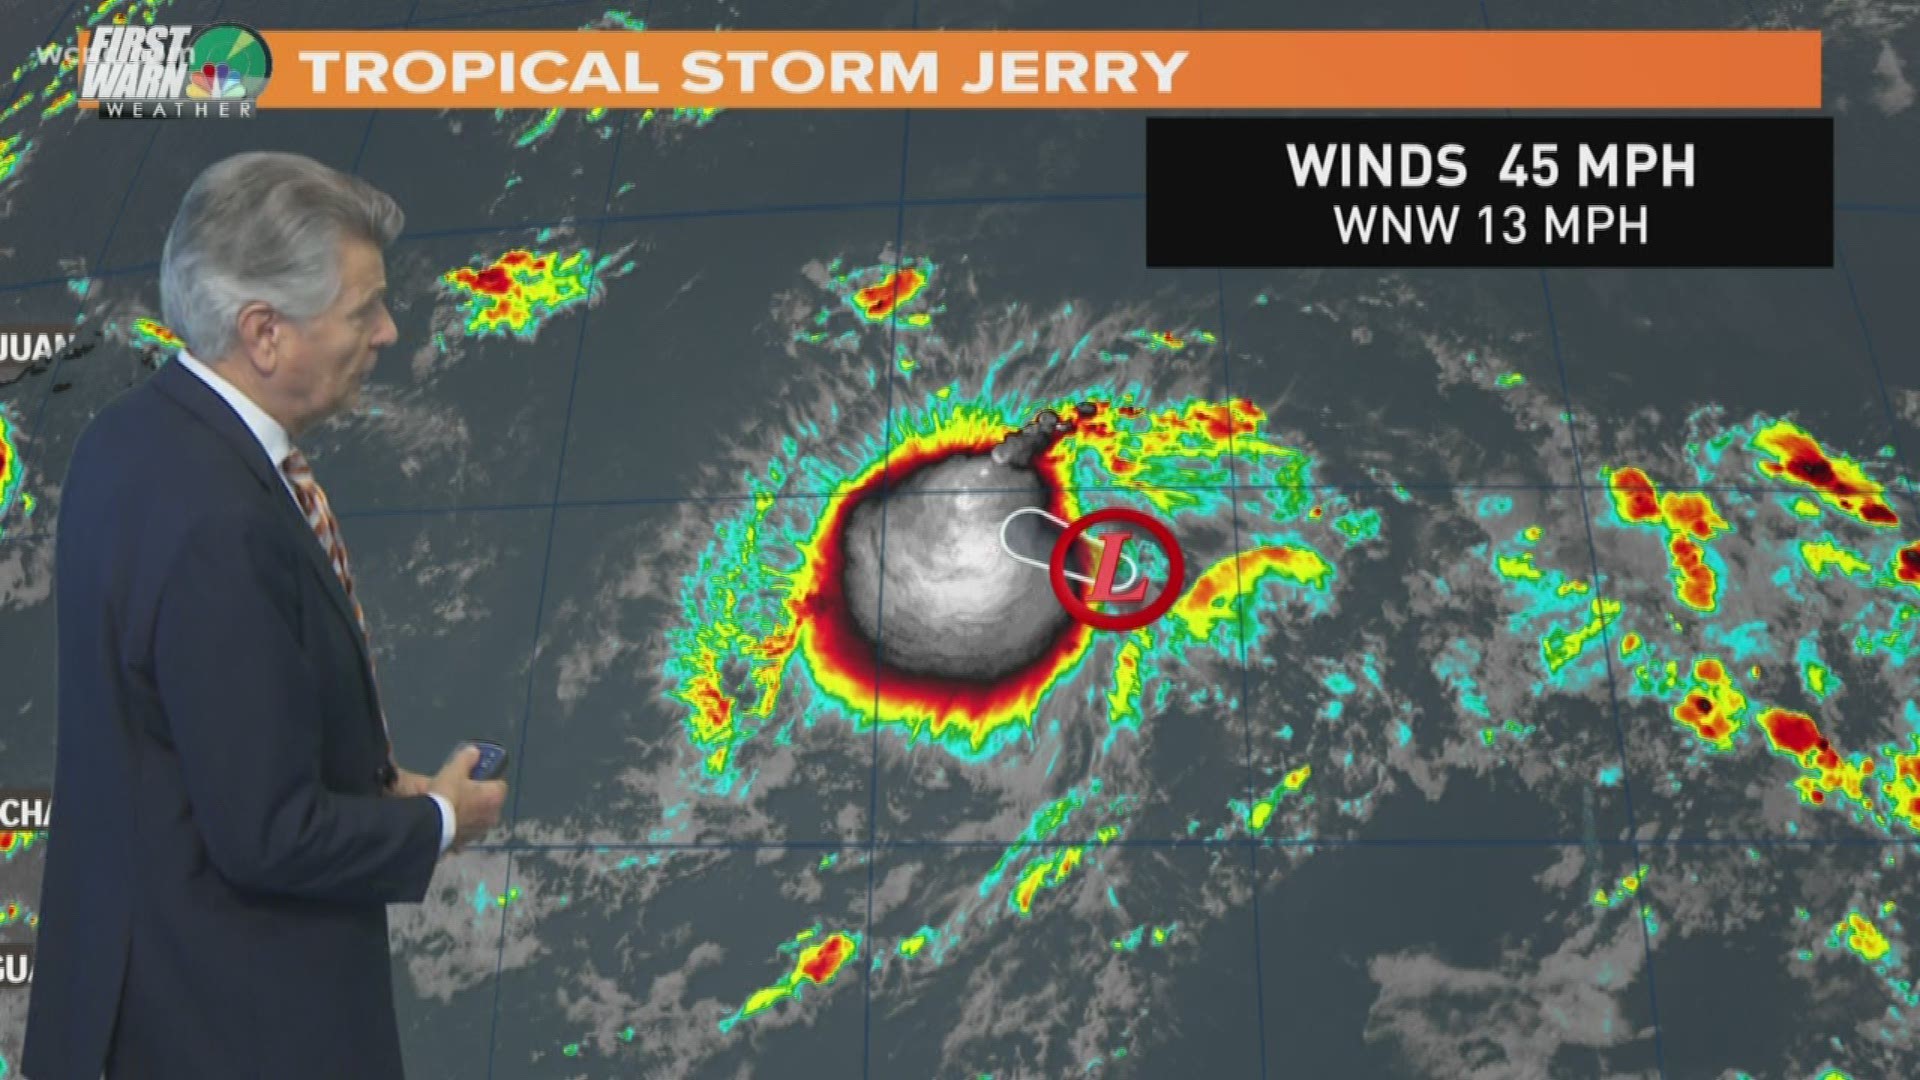 Tropical Storm Jerry is expected to move just north of Puerto Rico before approaching the east coast of the United States next week. The storm currently has 45 mph sustained winds and is expected to become a Category 1 hurricane.